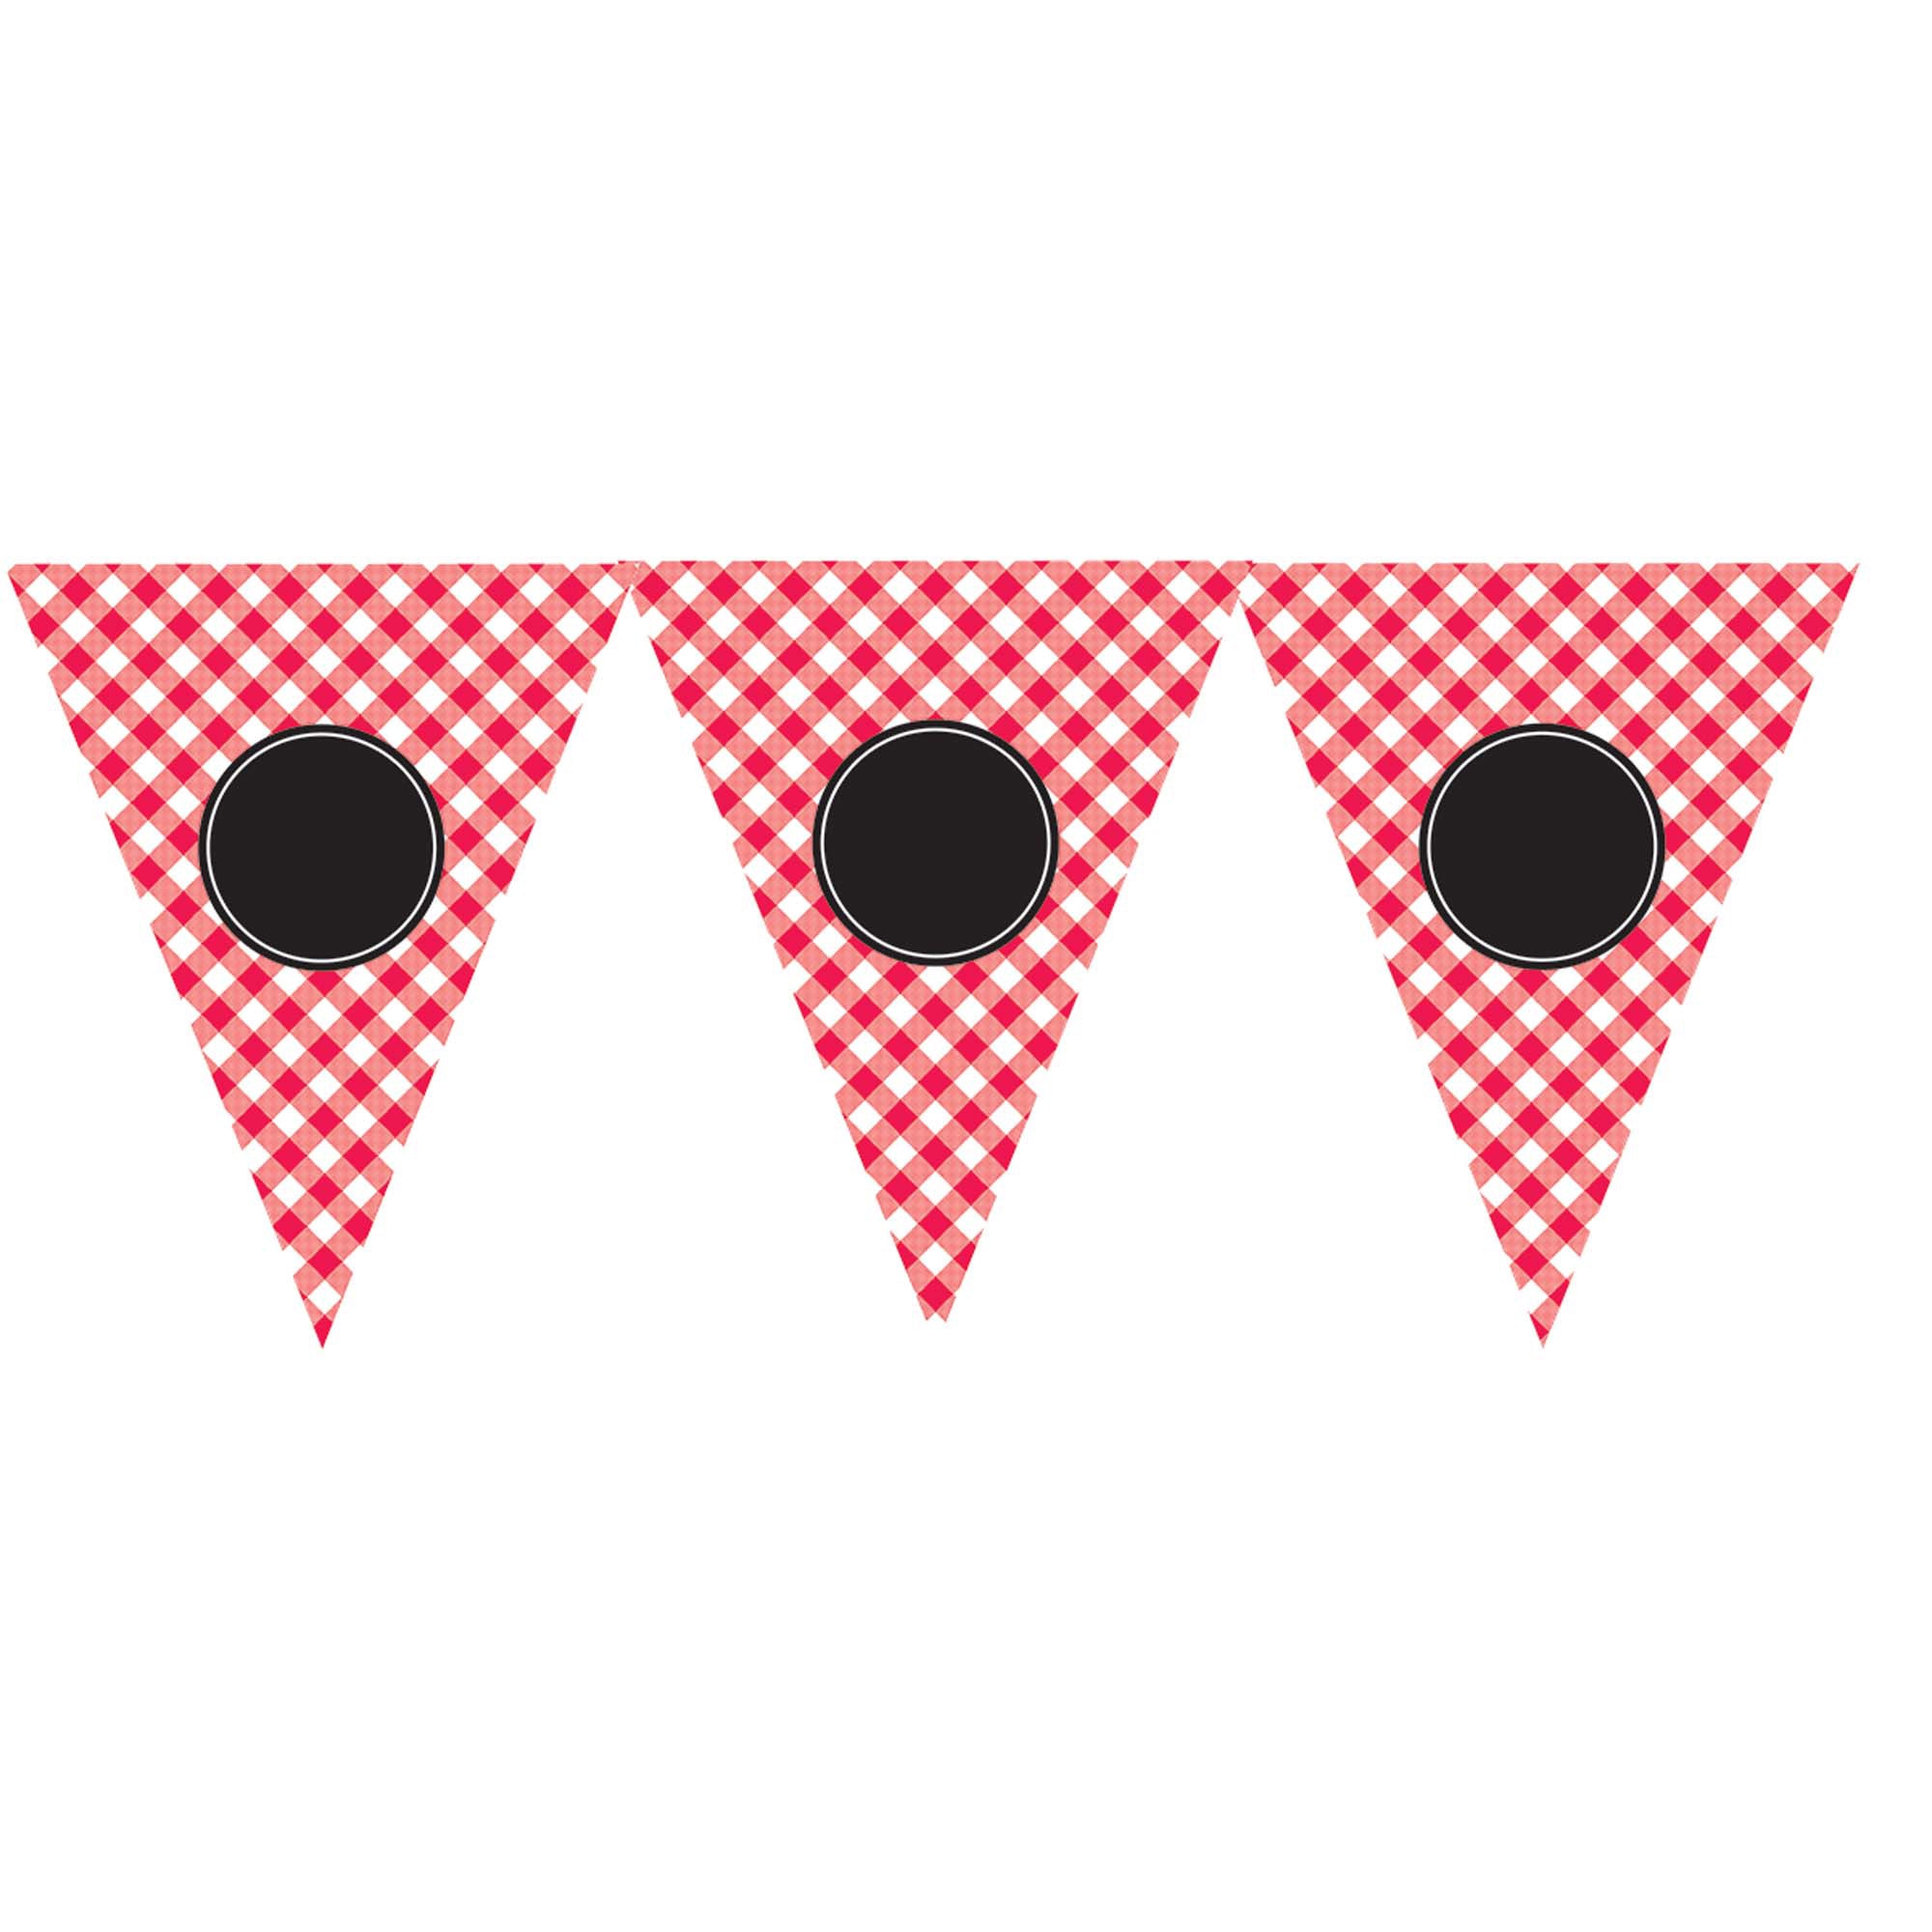 Picnic Party Personalized Banner Kit